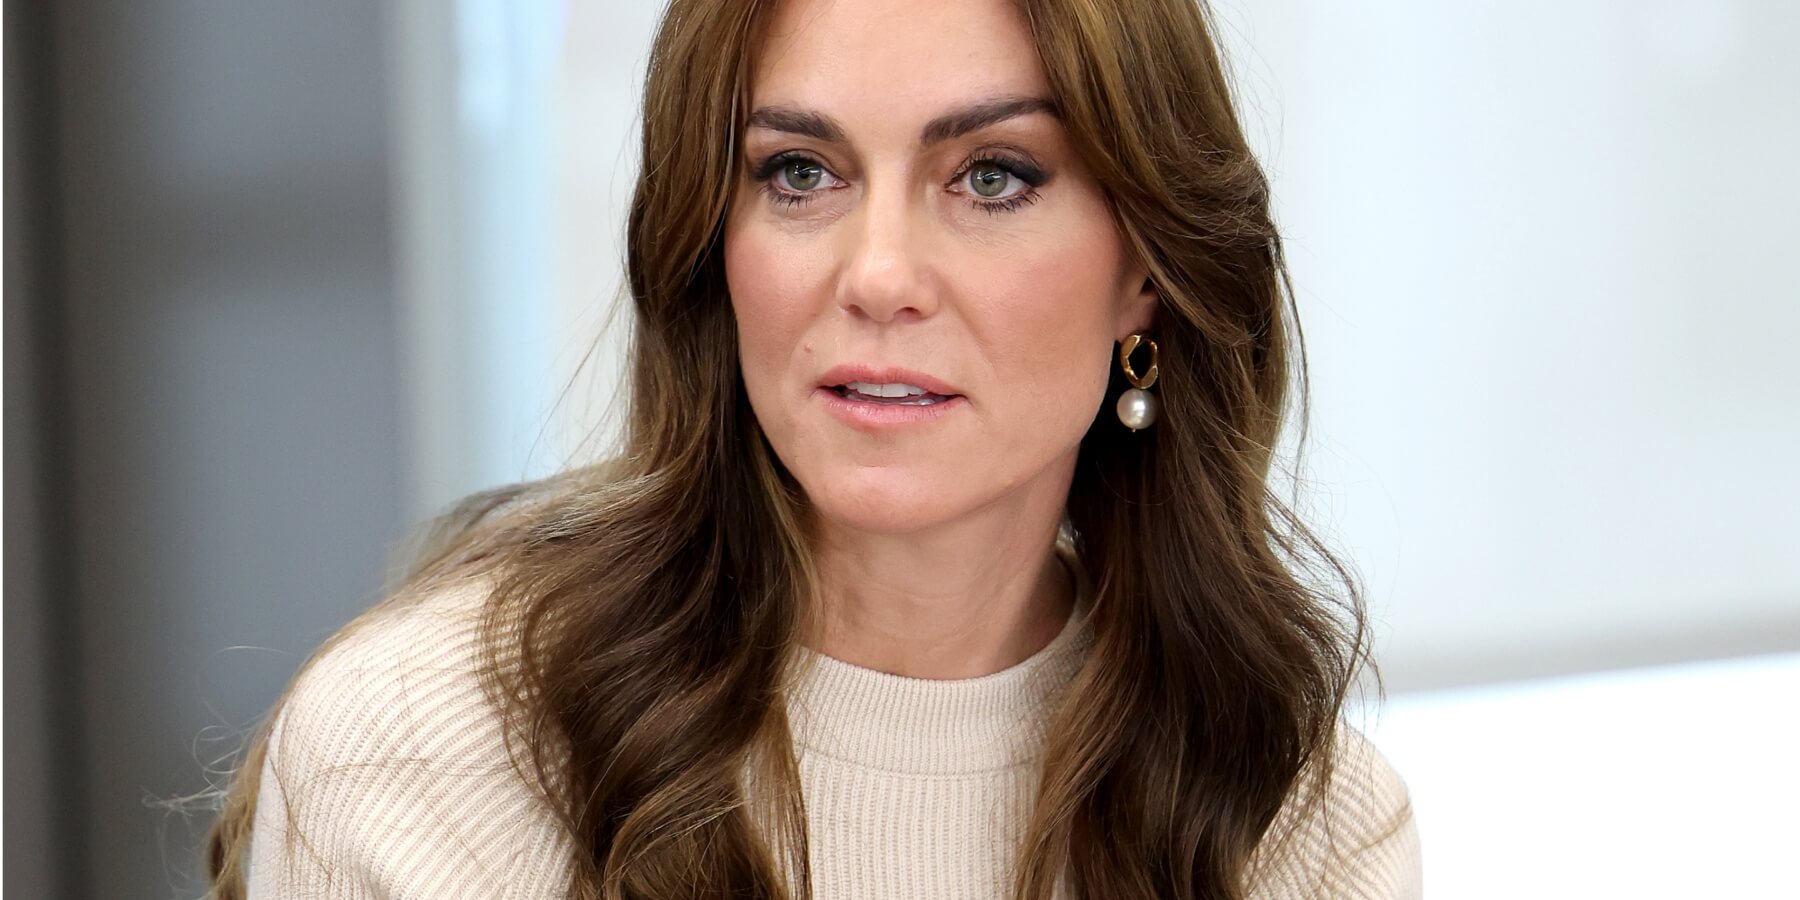 Kate Middleton is in a 'fragile' state, says royal reporter.